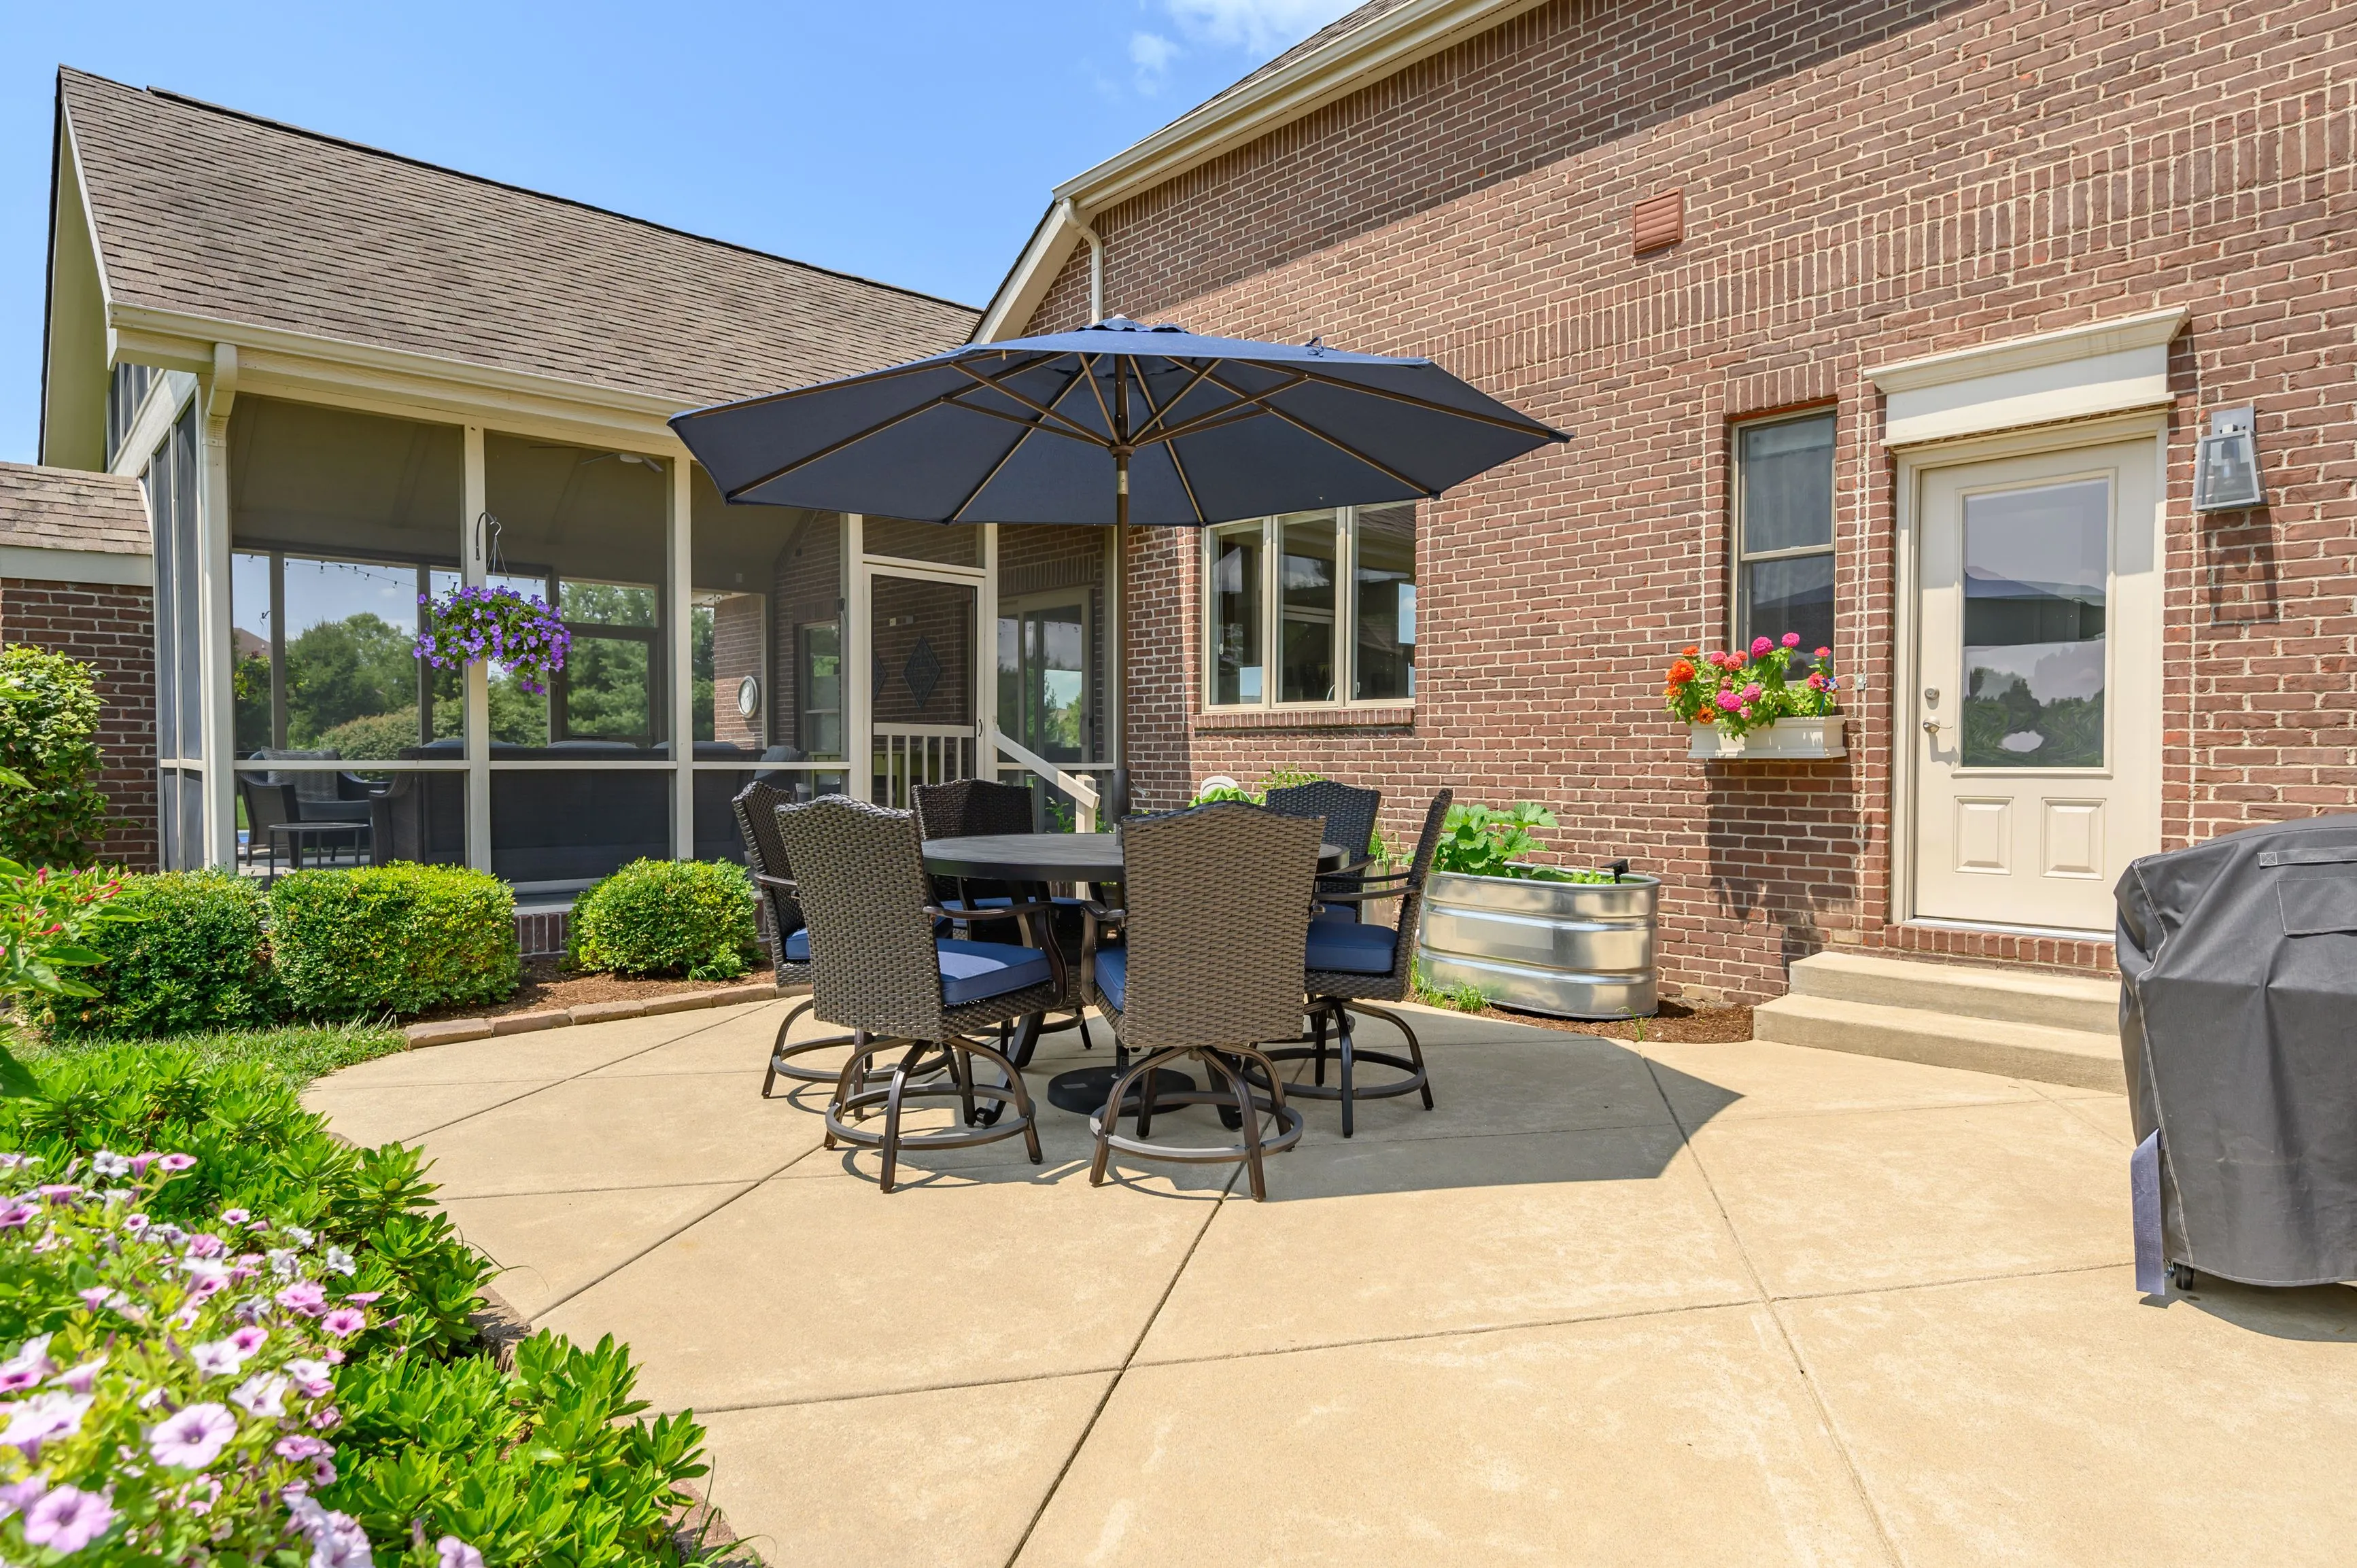 Patio area with outdoor furniture including a table with chairs and an umbrella, adjacent to a brick house, with a clear sky above.